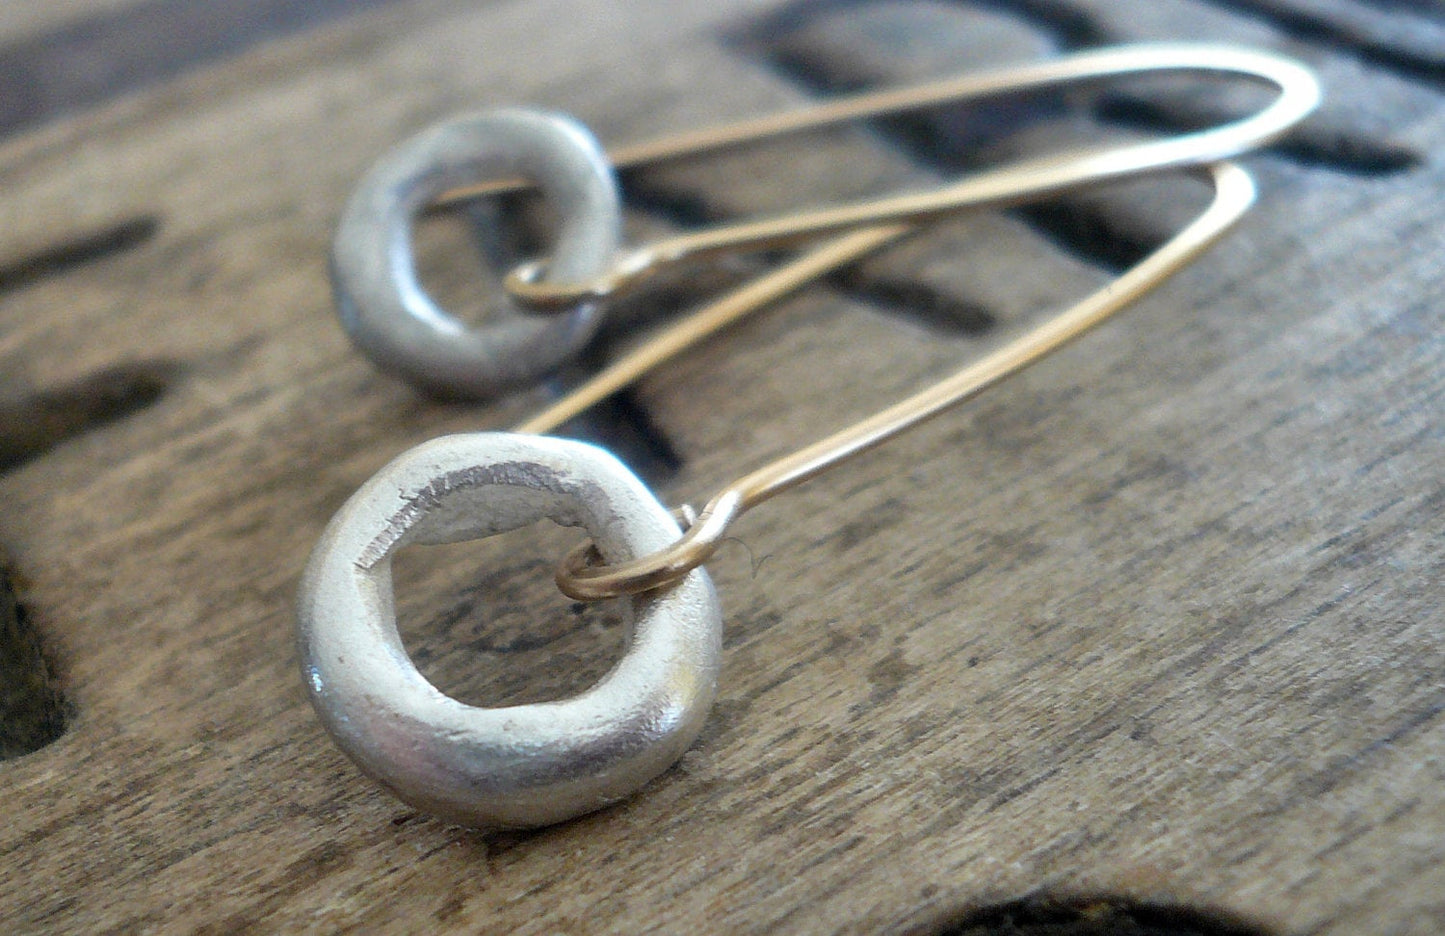 Unity Earrings - Handmade. Mixed Metal. Brushed Fine Silver &14kt Goldfill